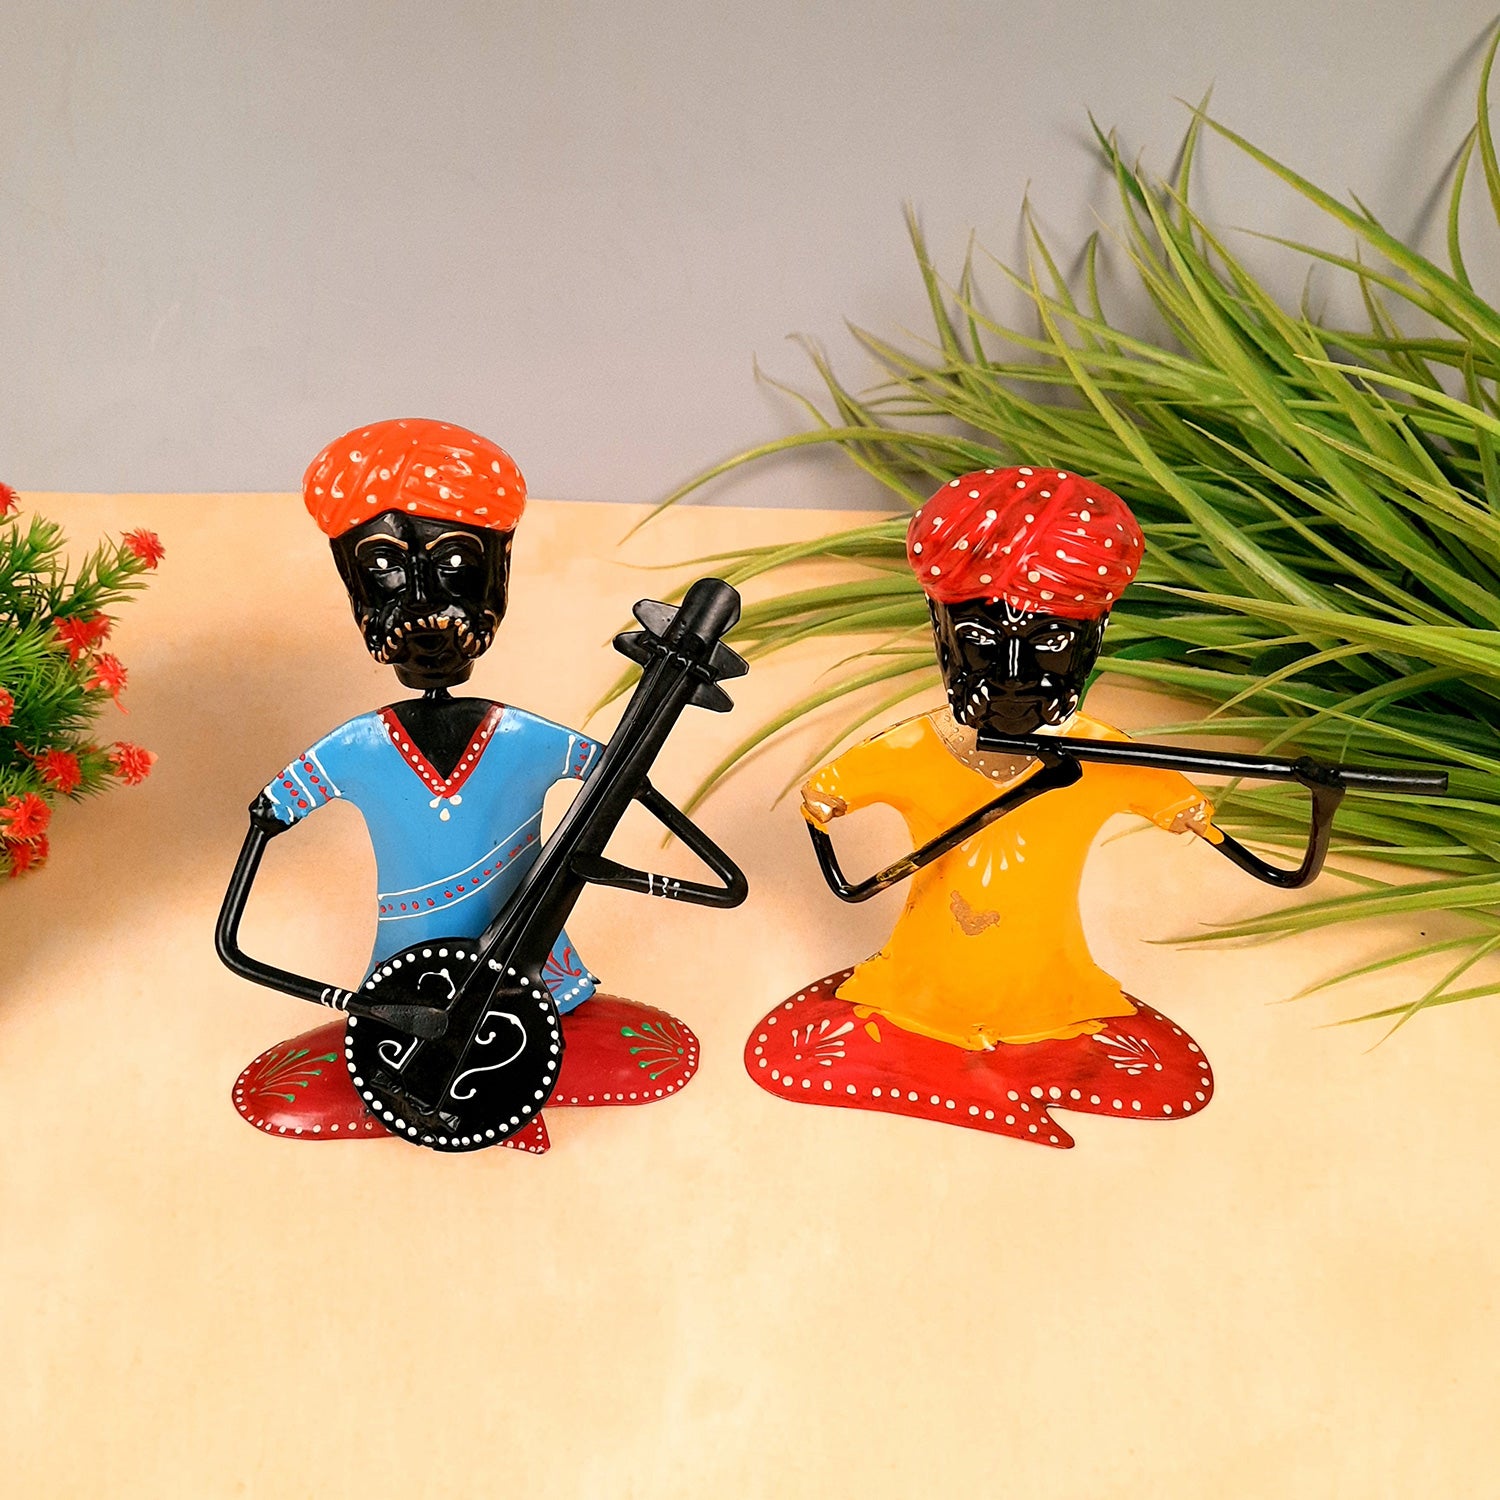 Rajasthani Musicians Figurines | Decorative Showpiece - for Home, Bedroom, Living Room, Office Desk & Table | Gifts For Wedding, Housewarming & Festivals - 7 Inch - Apkamart #Style_Pack of 2